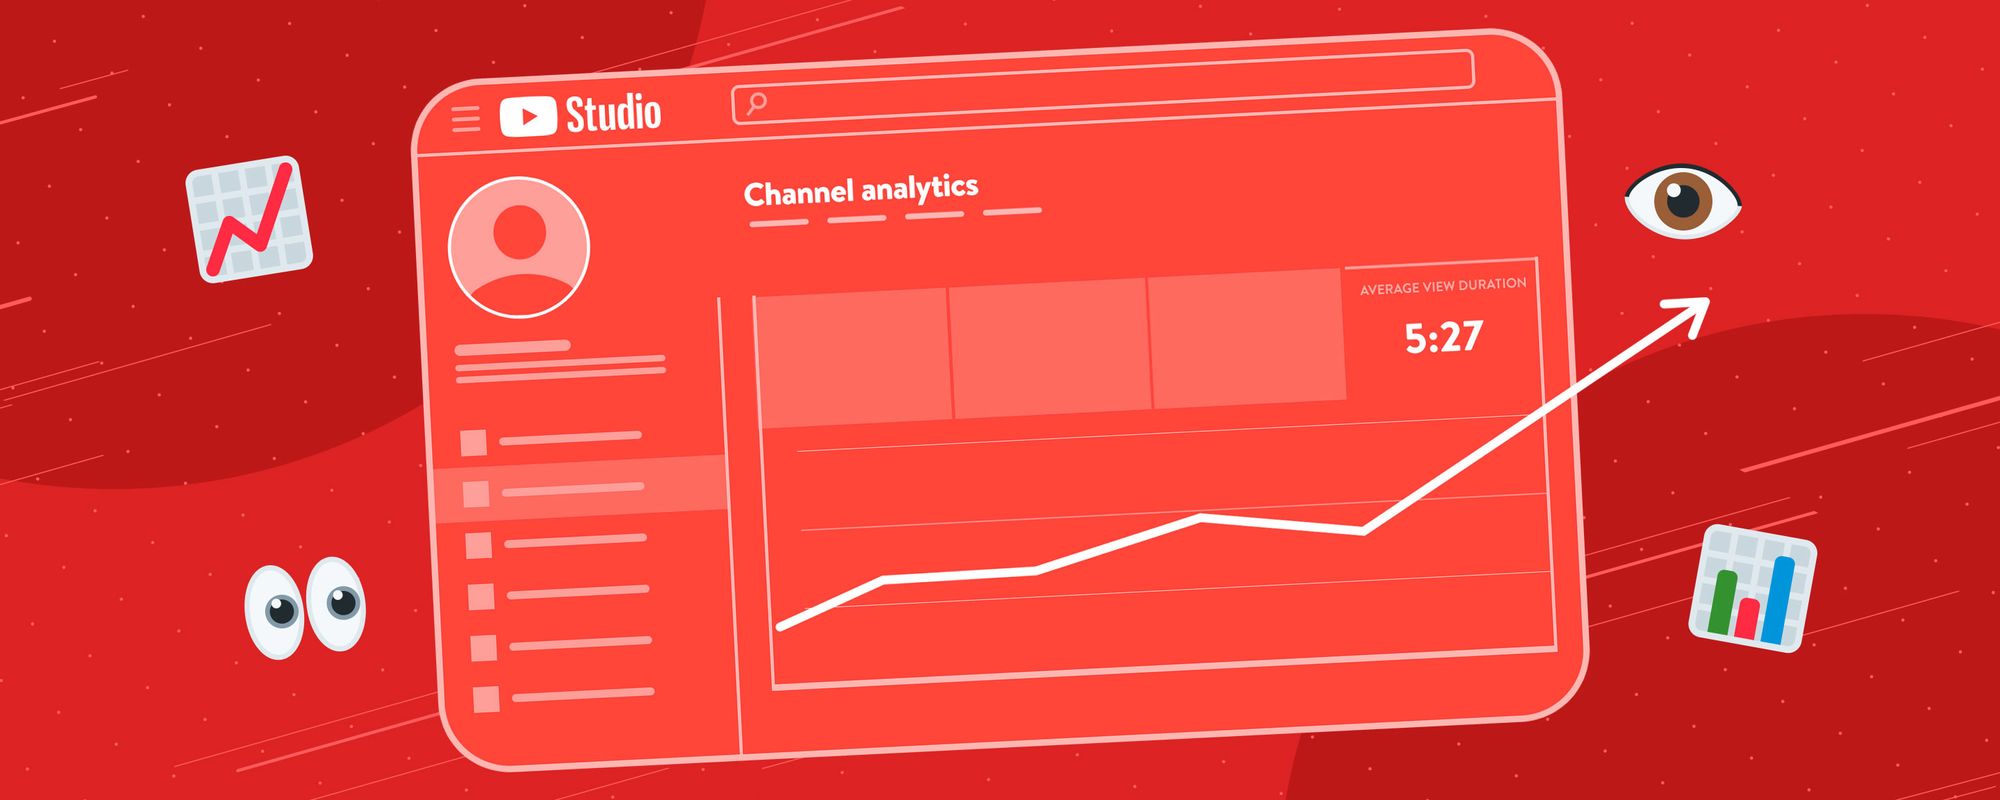 Illustration of YouTube Studio's channel analytics pages.